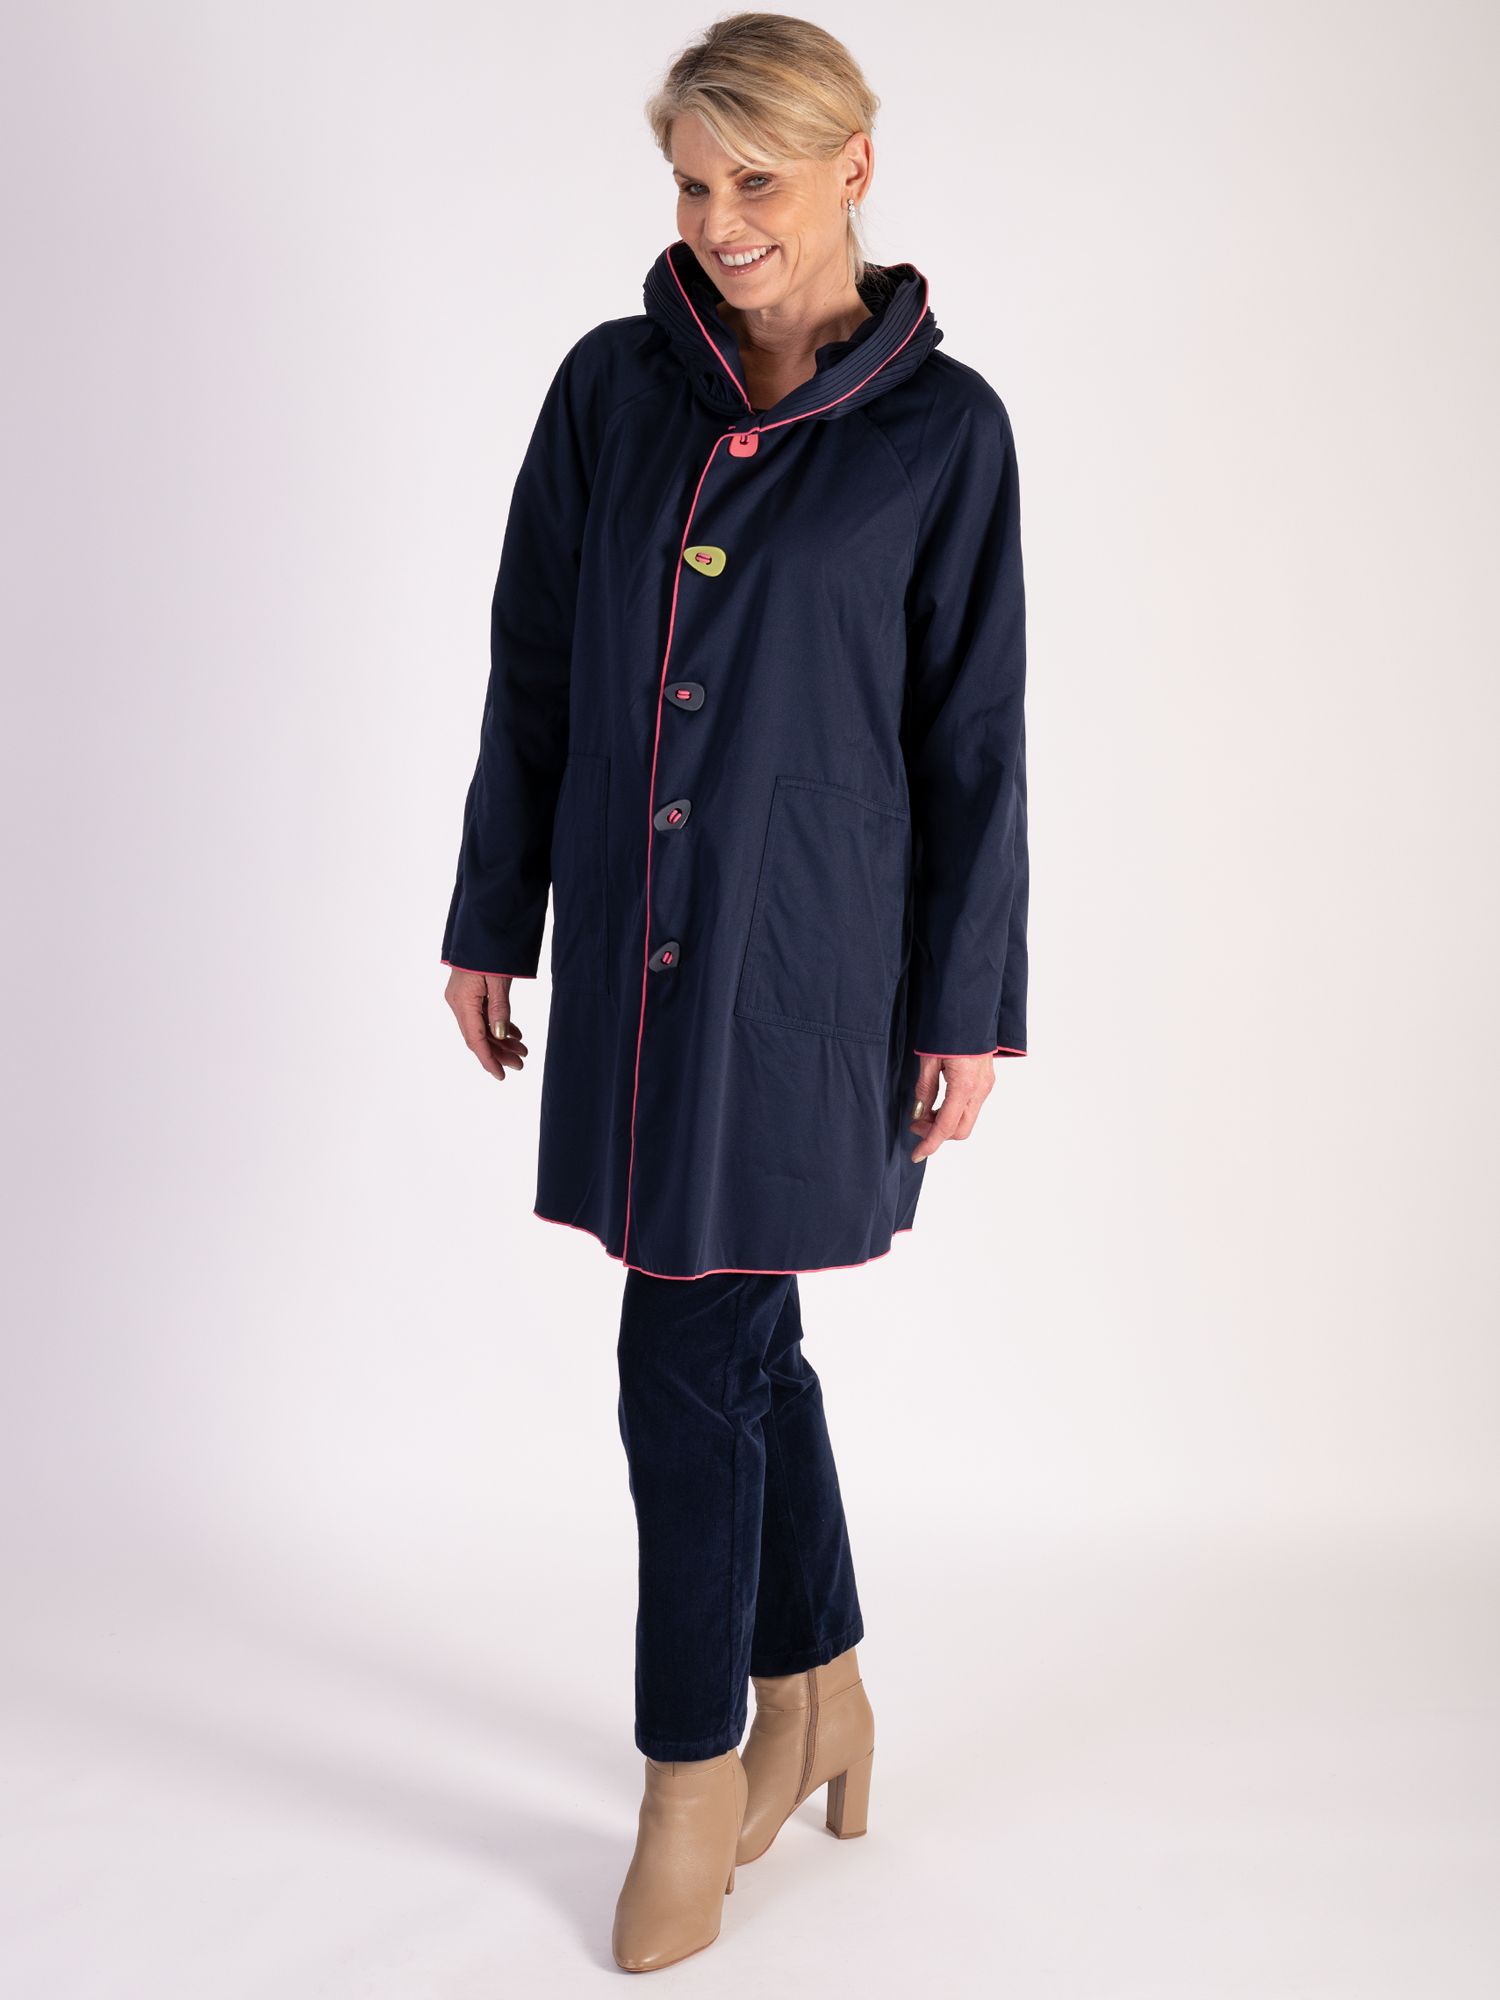 chesca Piped Reversible Raincoat, Navy/Navy, 14